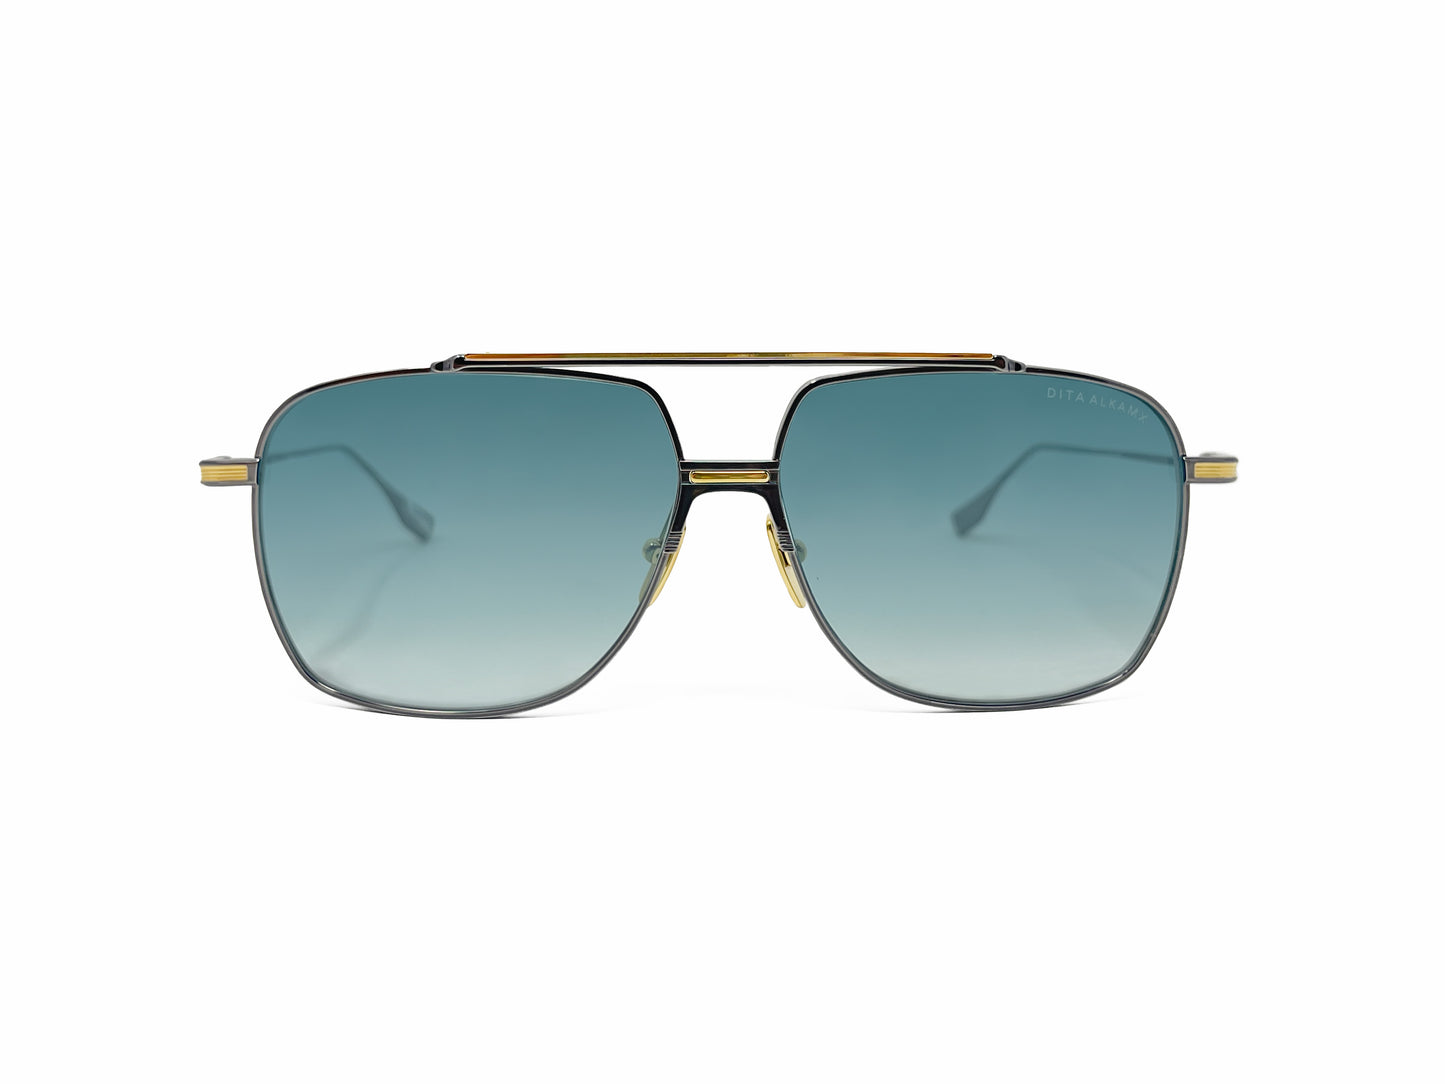 Dita squared aviator style sunglass with bar across top. Model: Alkamx. Color: 02 - Gunmetal with gold accents and blue gradient lenses. Front view. 